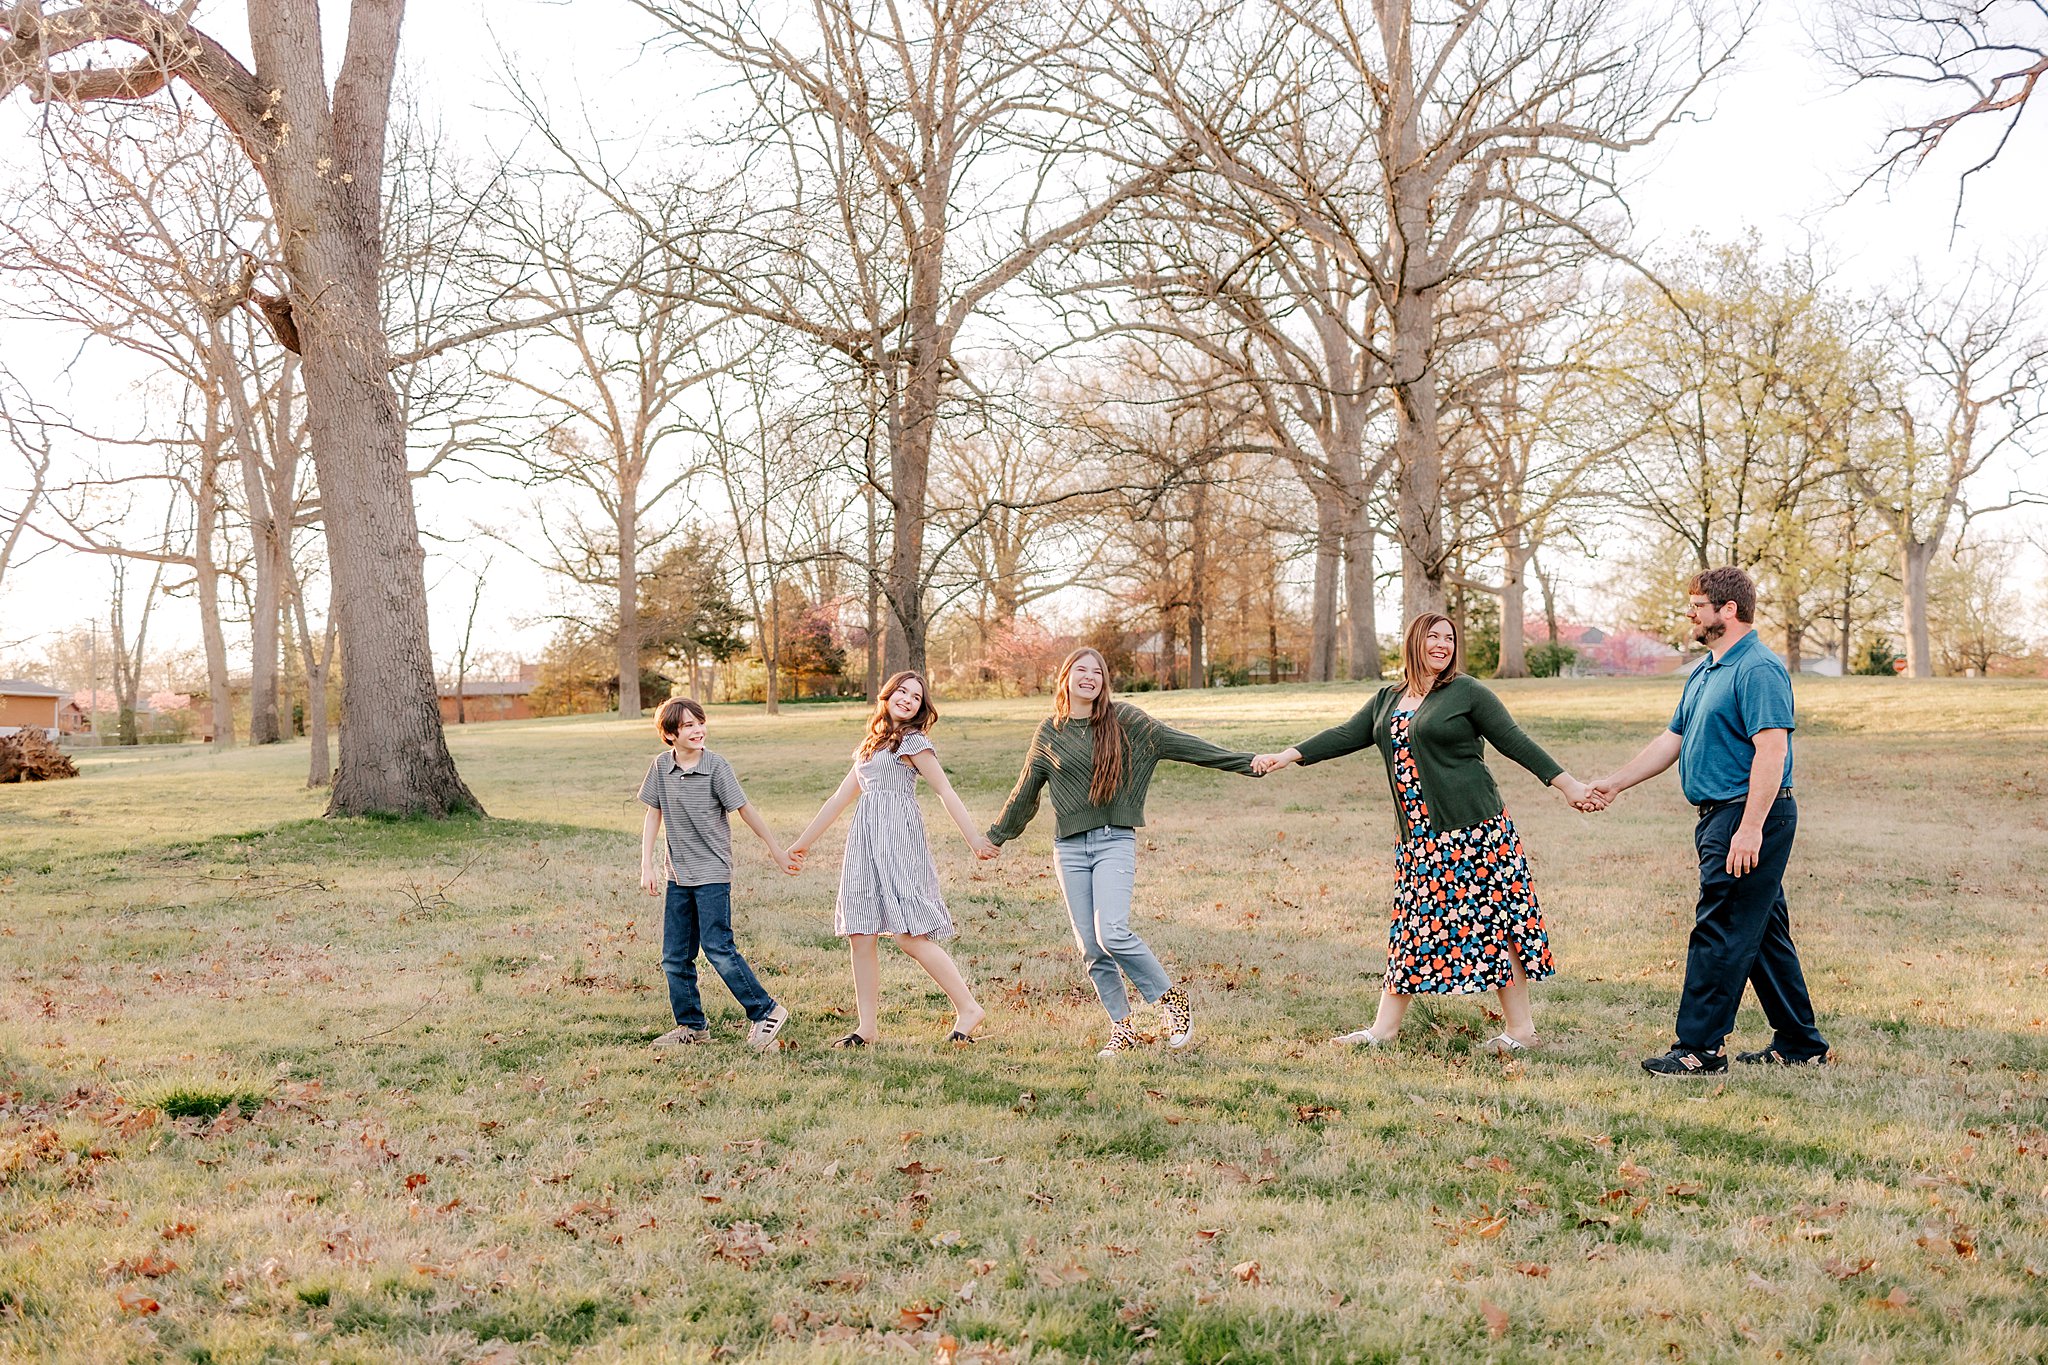 A family of five walk through a park field holding hands